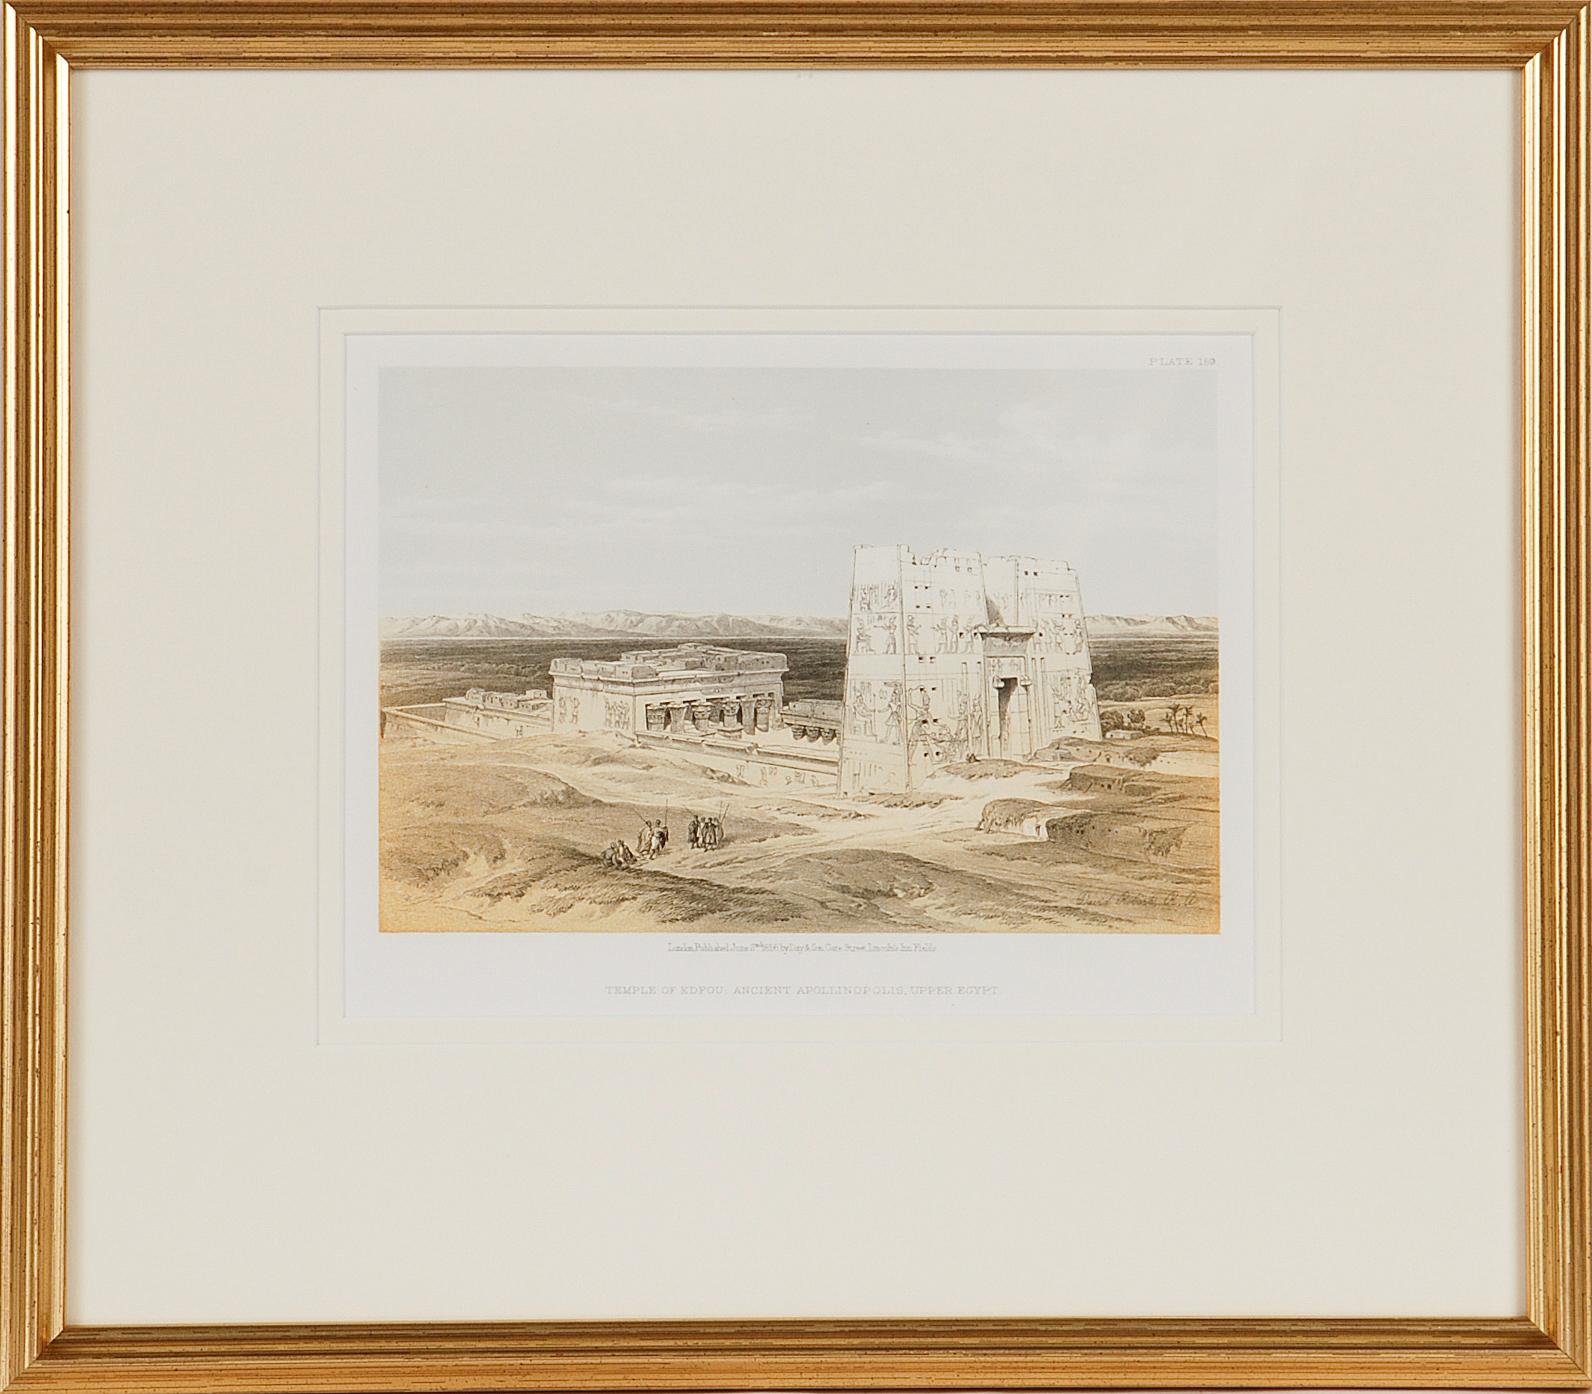 Temple of Edfou, Egypt: A 19th Century Lithograph by David Roberts